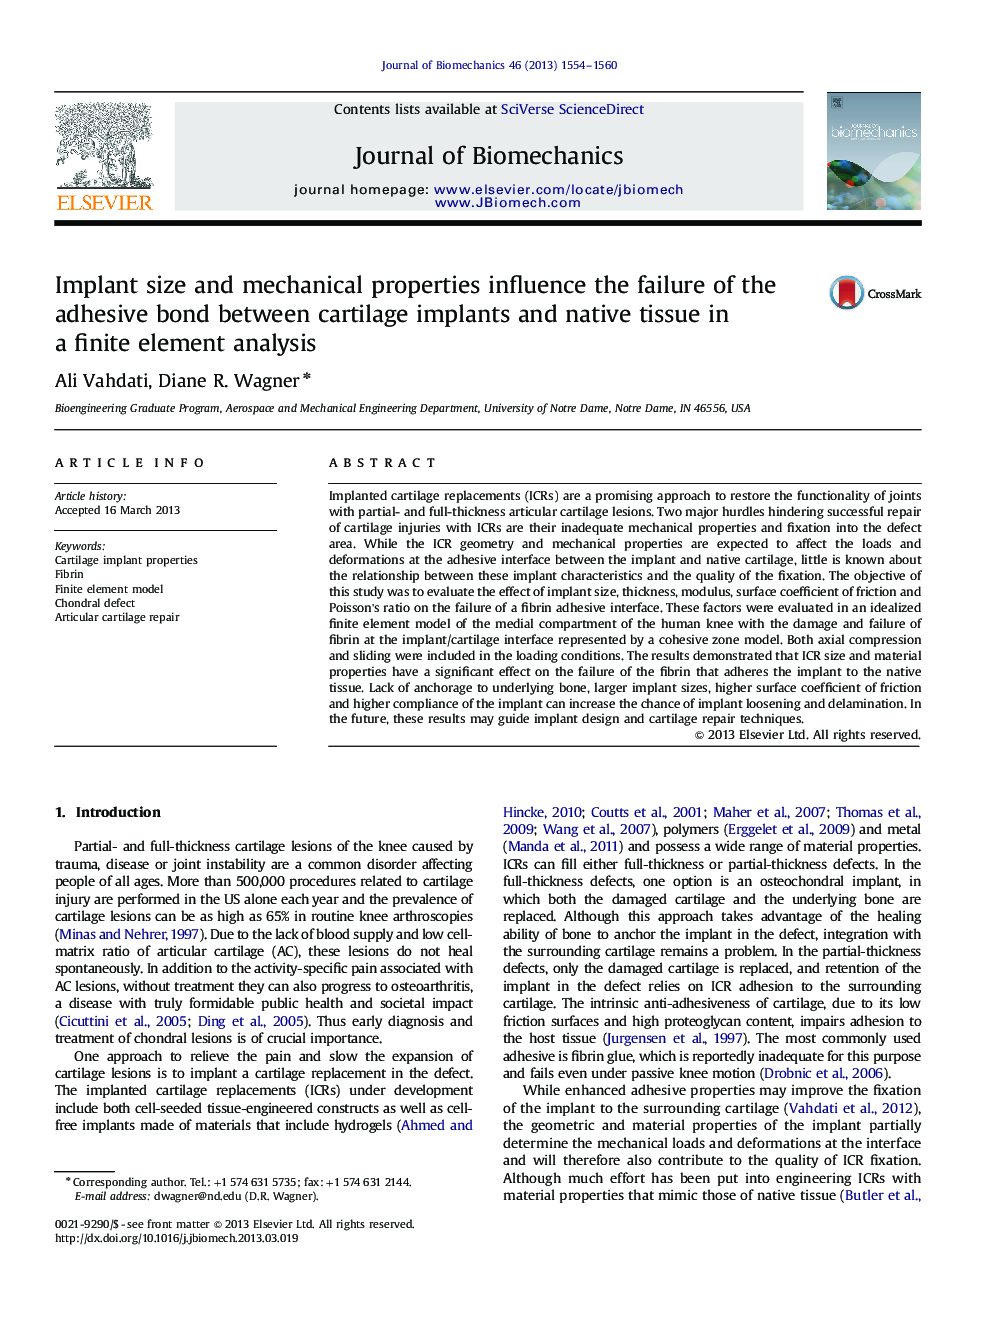 Implant size and mechanical properties influence the failure of the adhesive bond between cartilage implants and native tissue in a finite element analysis